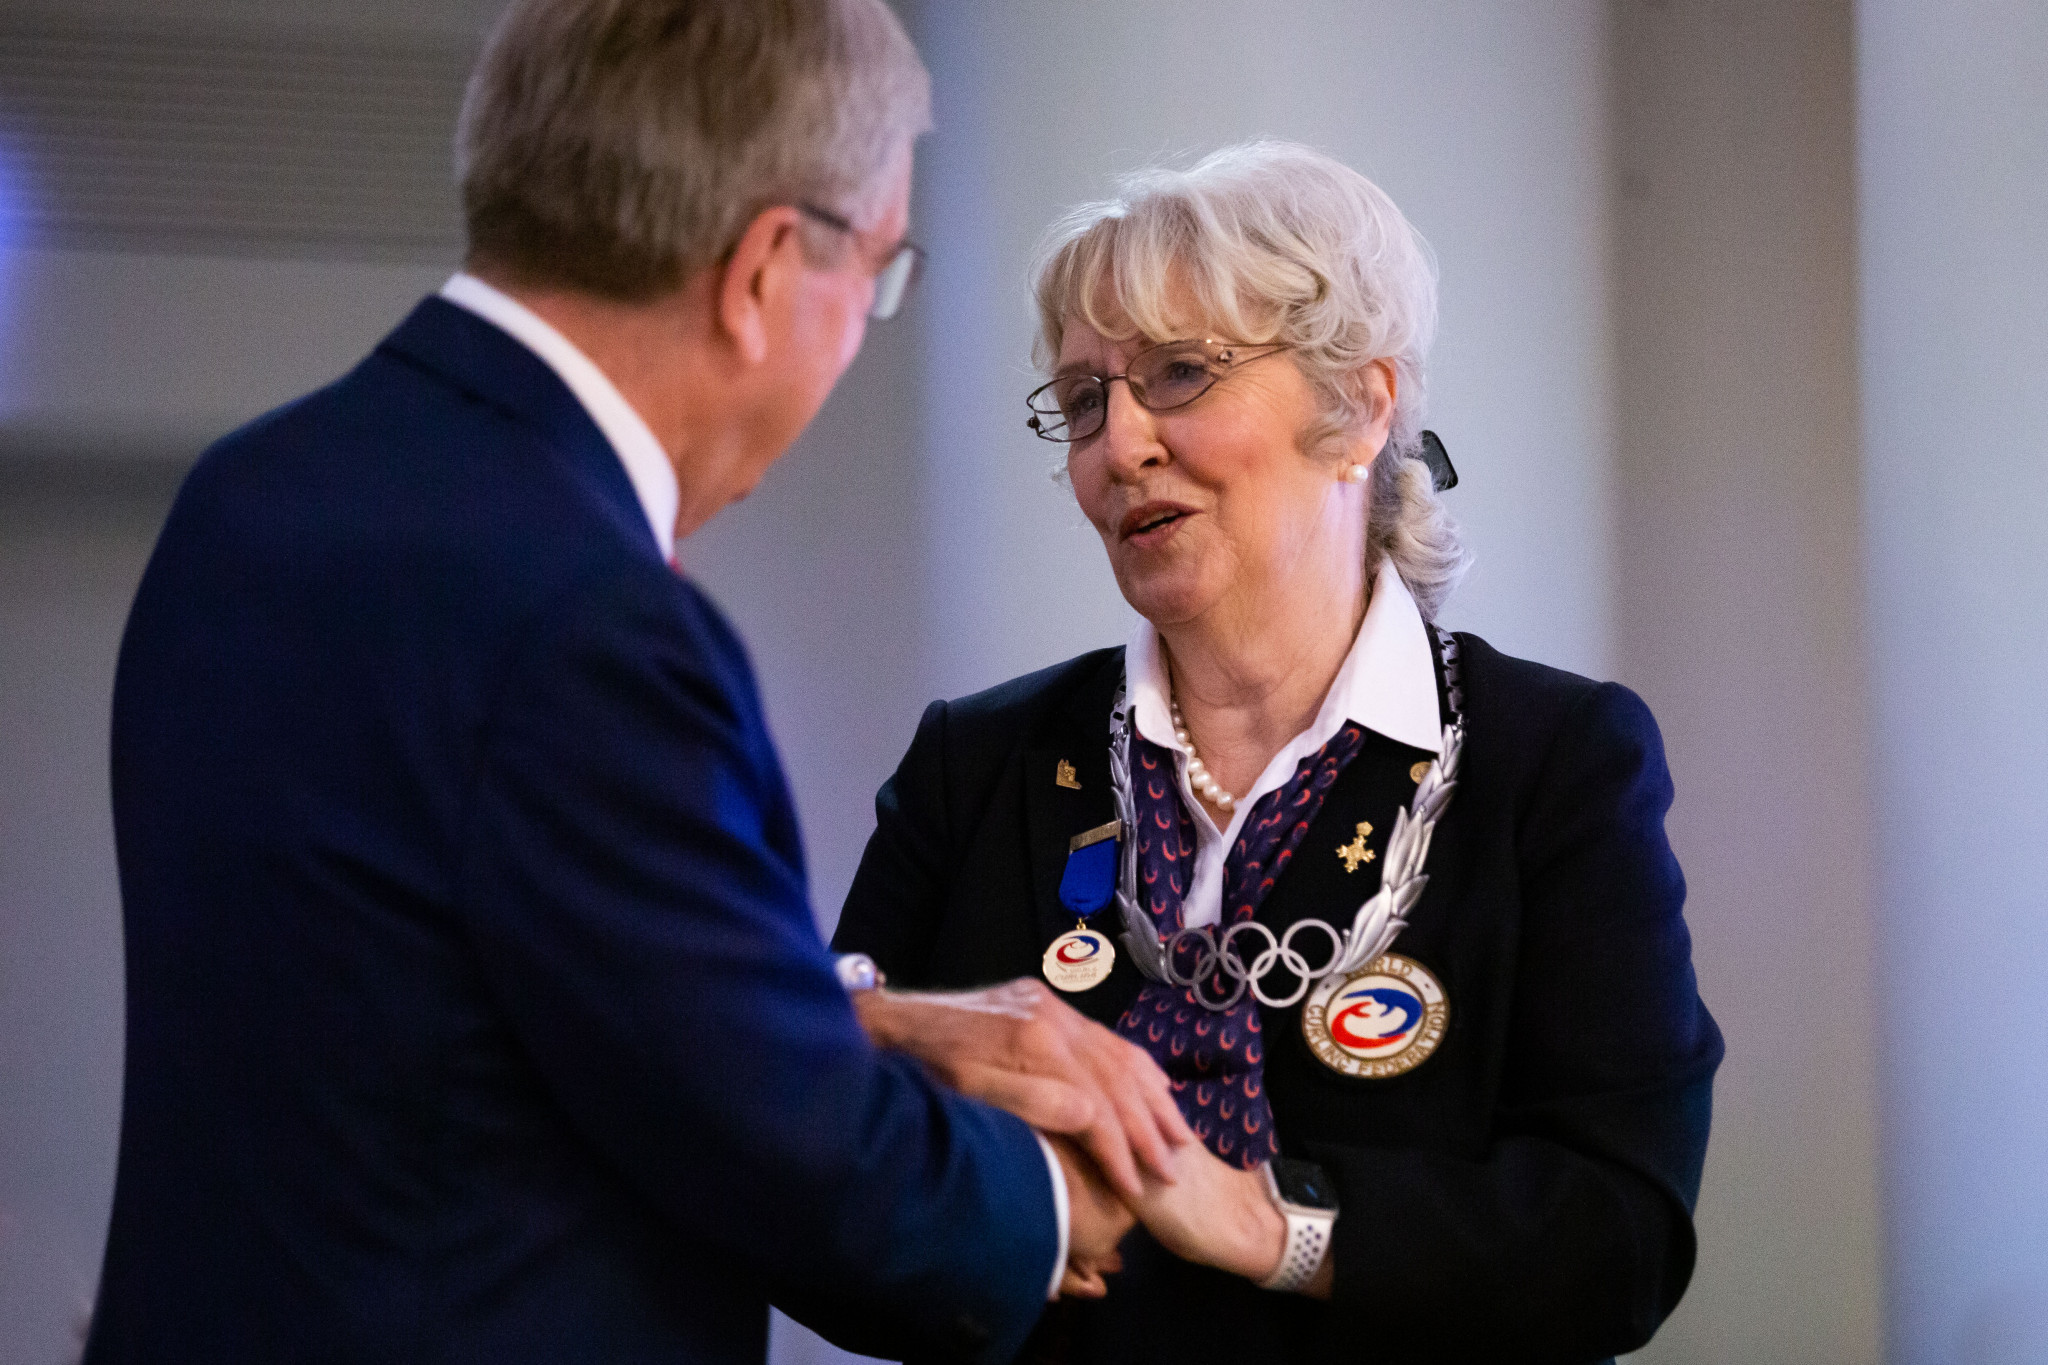 Former WCF President Kate Caithness has been awarded with the Olympic Order from IOC President Thomas Bach ©WCF/Celine Stucki